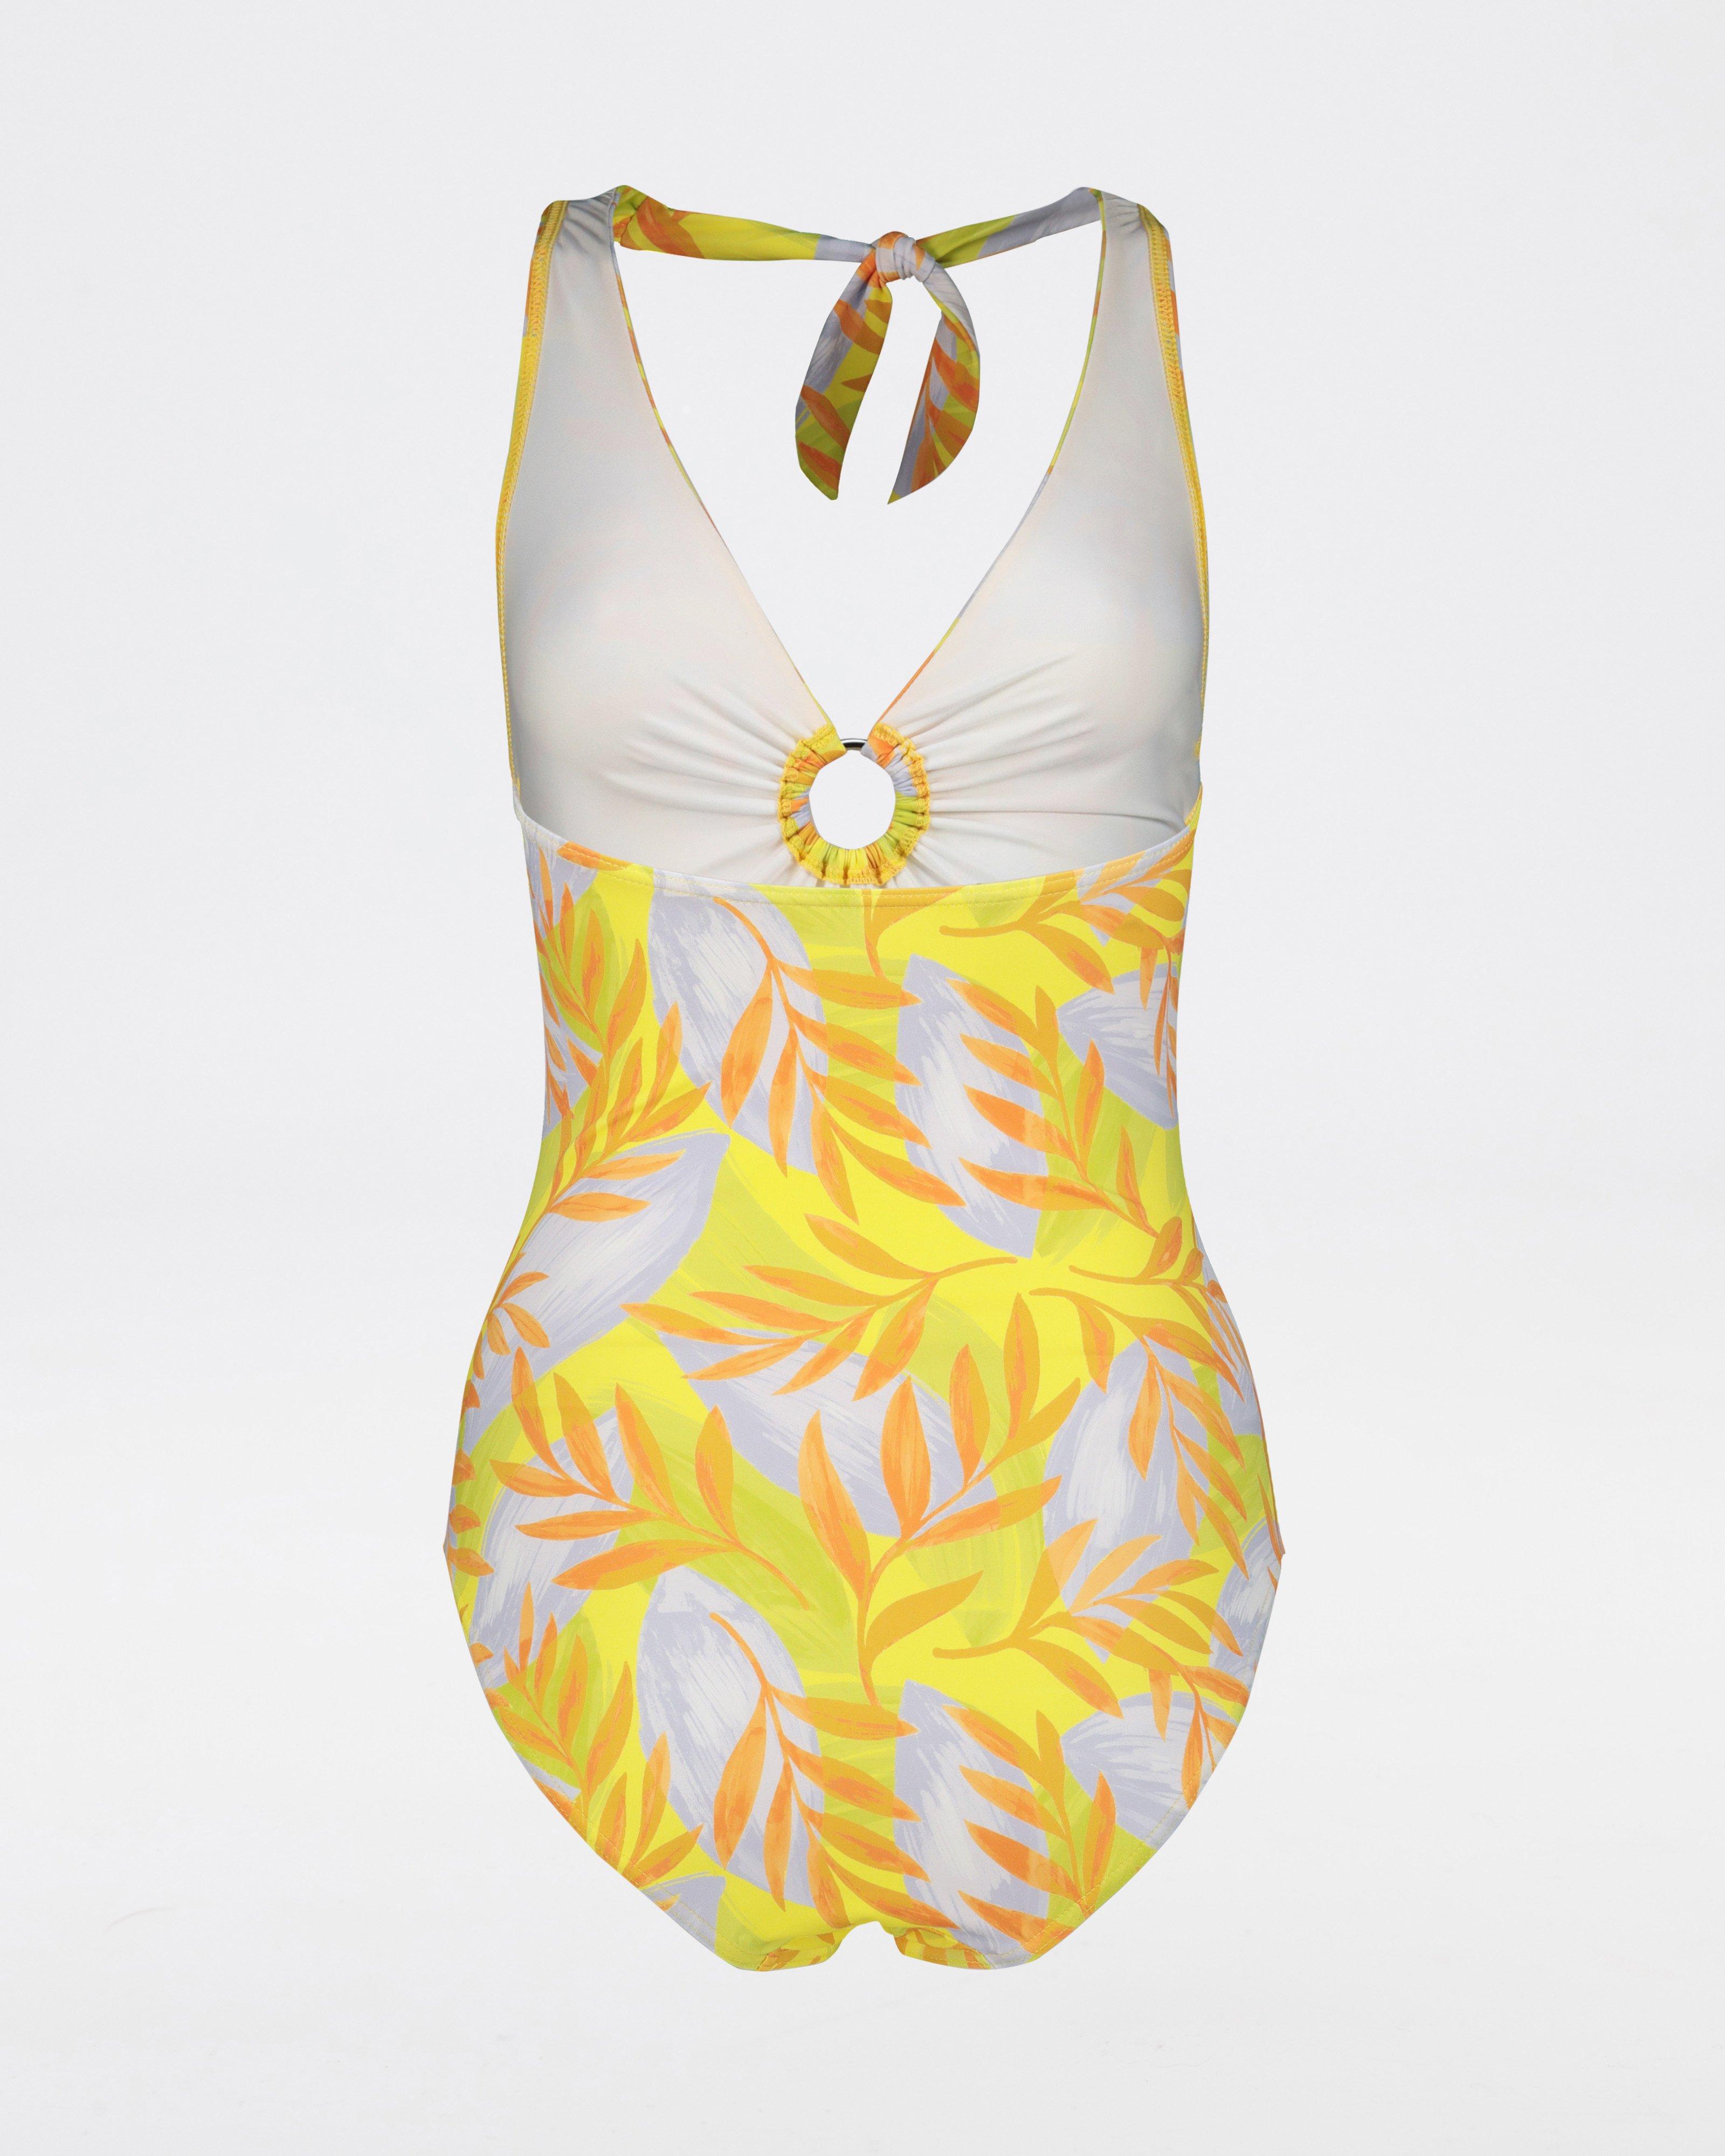  Rio Halter One-Piece Swimsuit -  Chartreuse